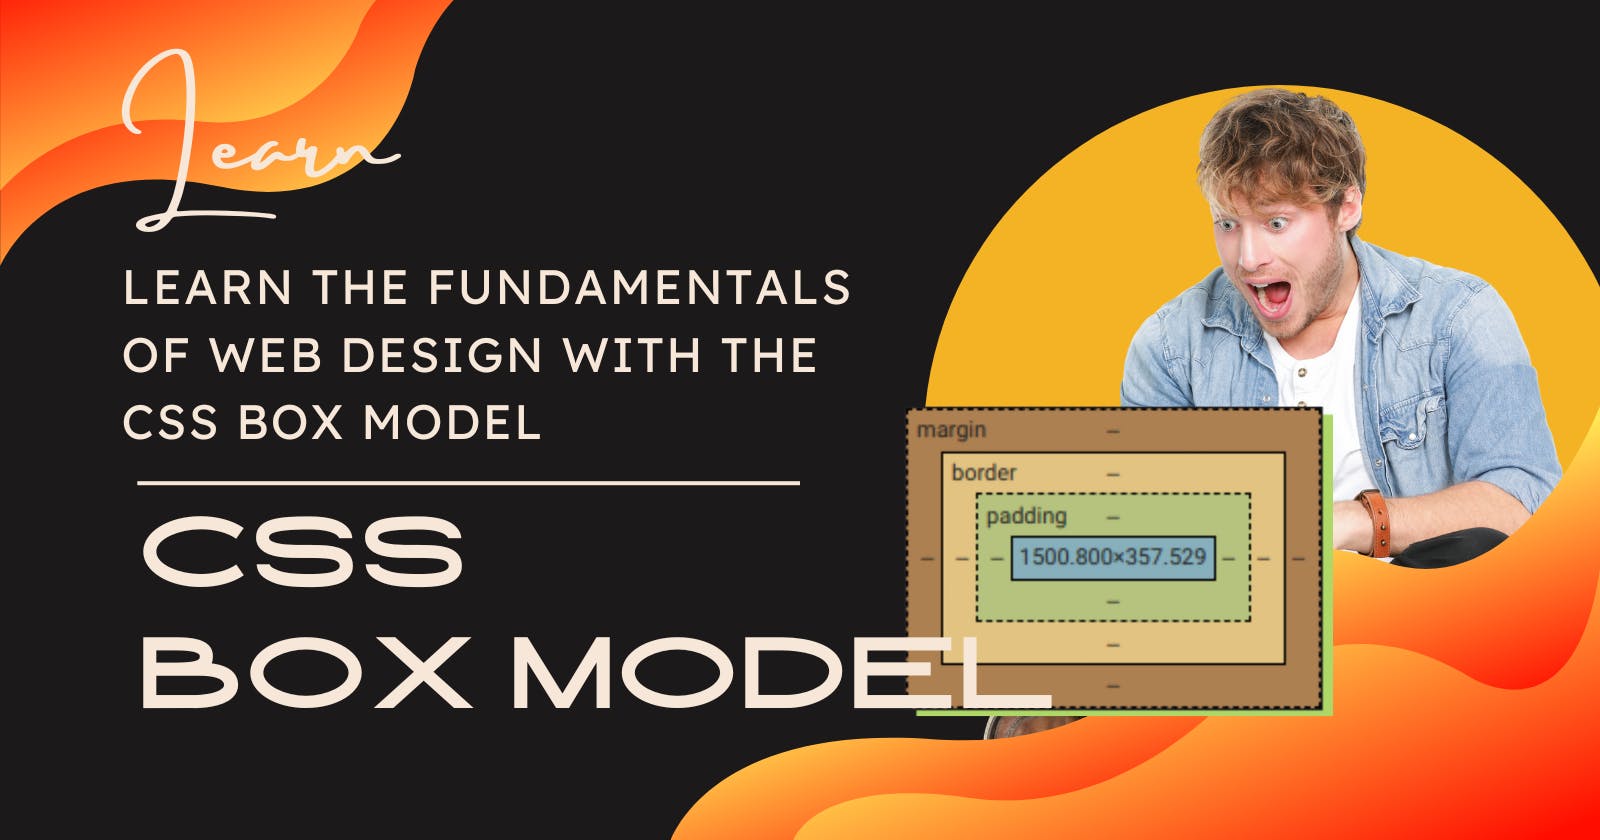 Learn the fundamentals of web design with the CSS box model